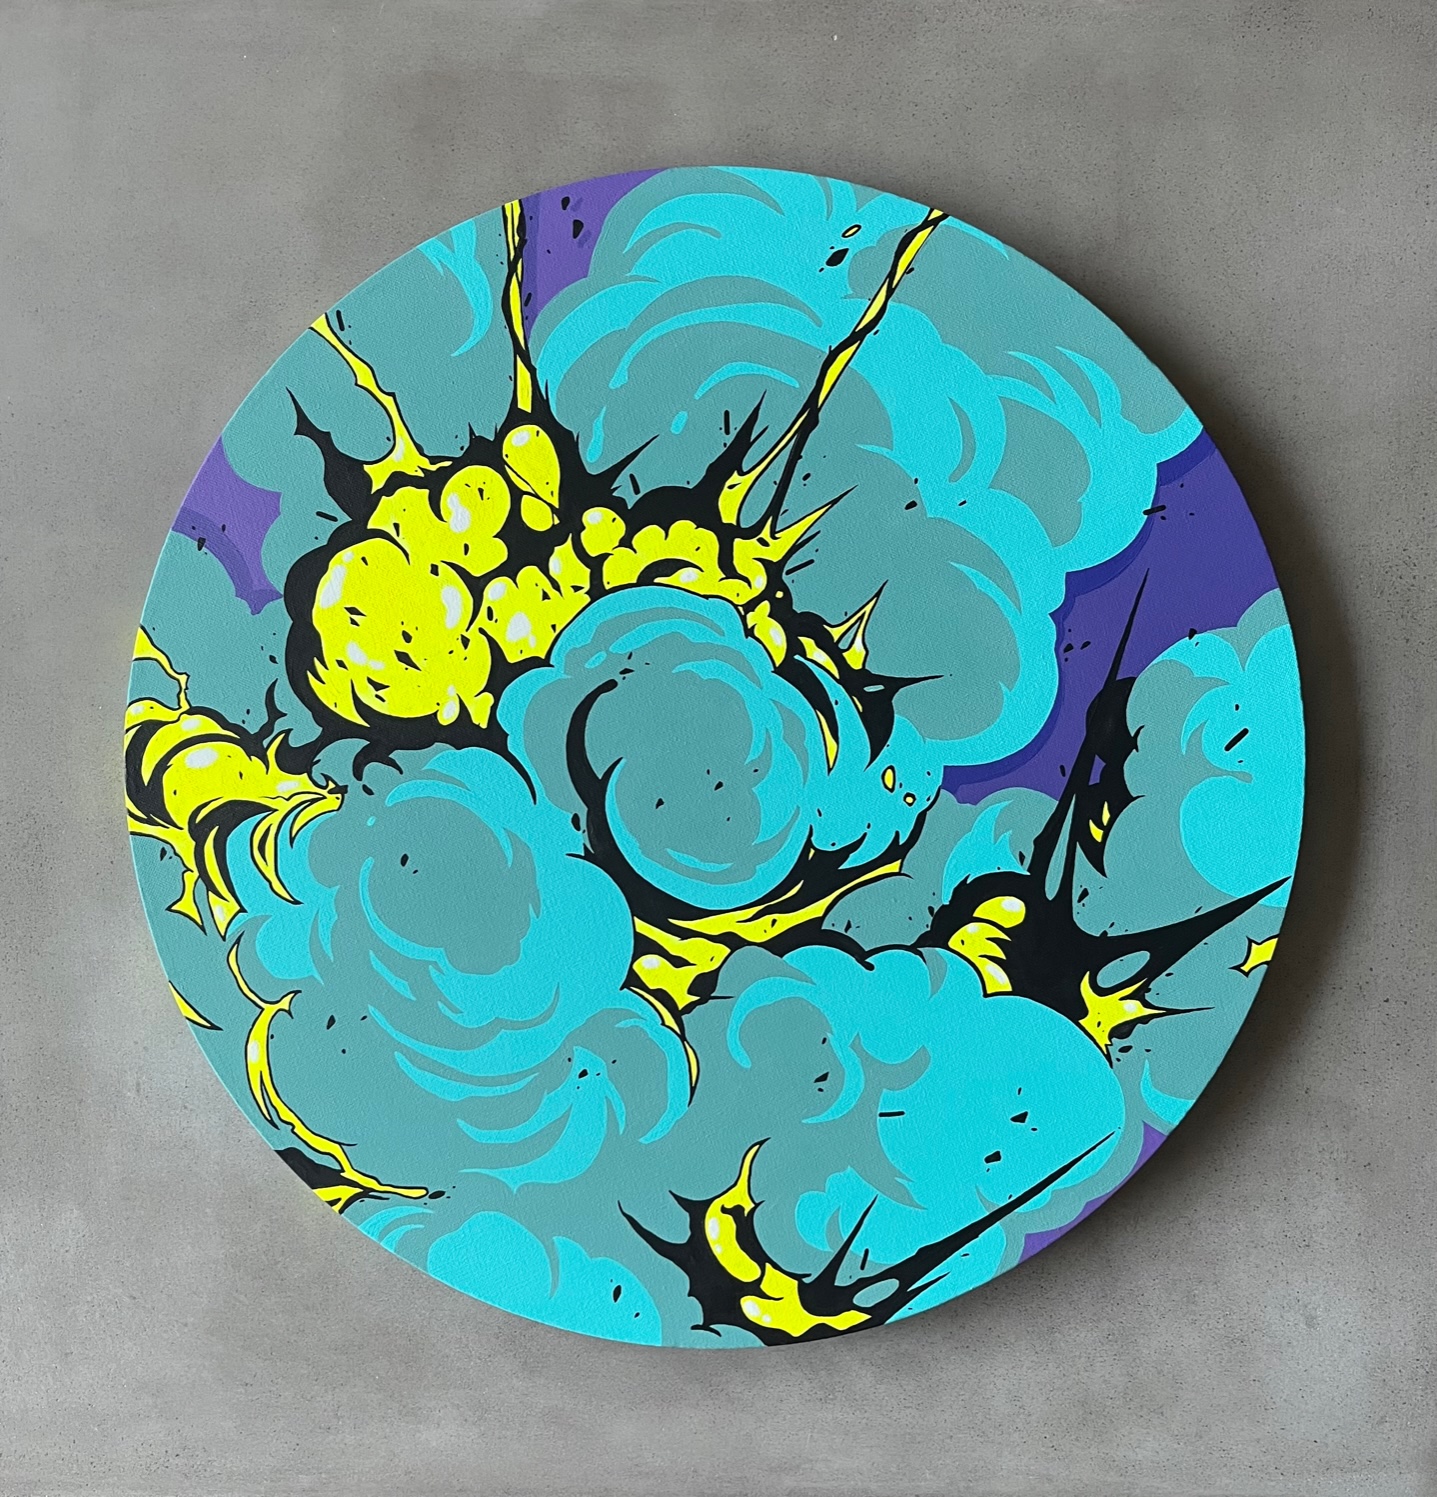 "Out of Time", 24" Round Canvas with Acrylic Paint, 2022.